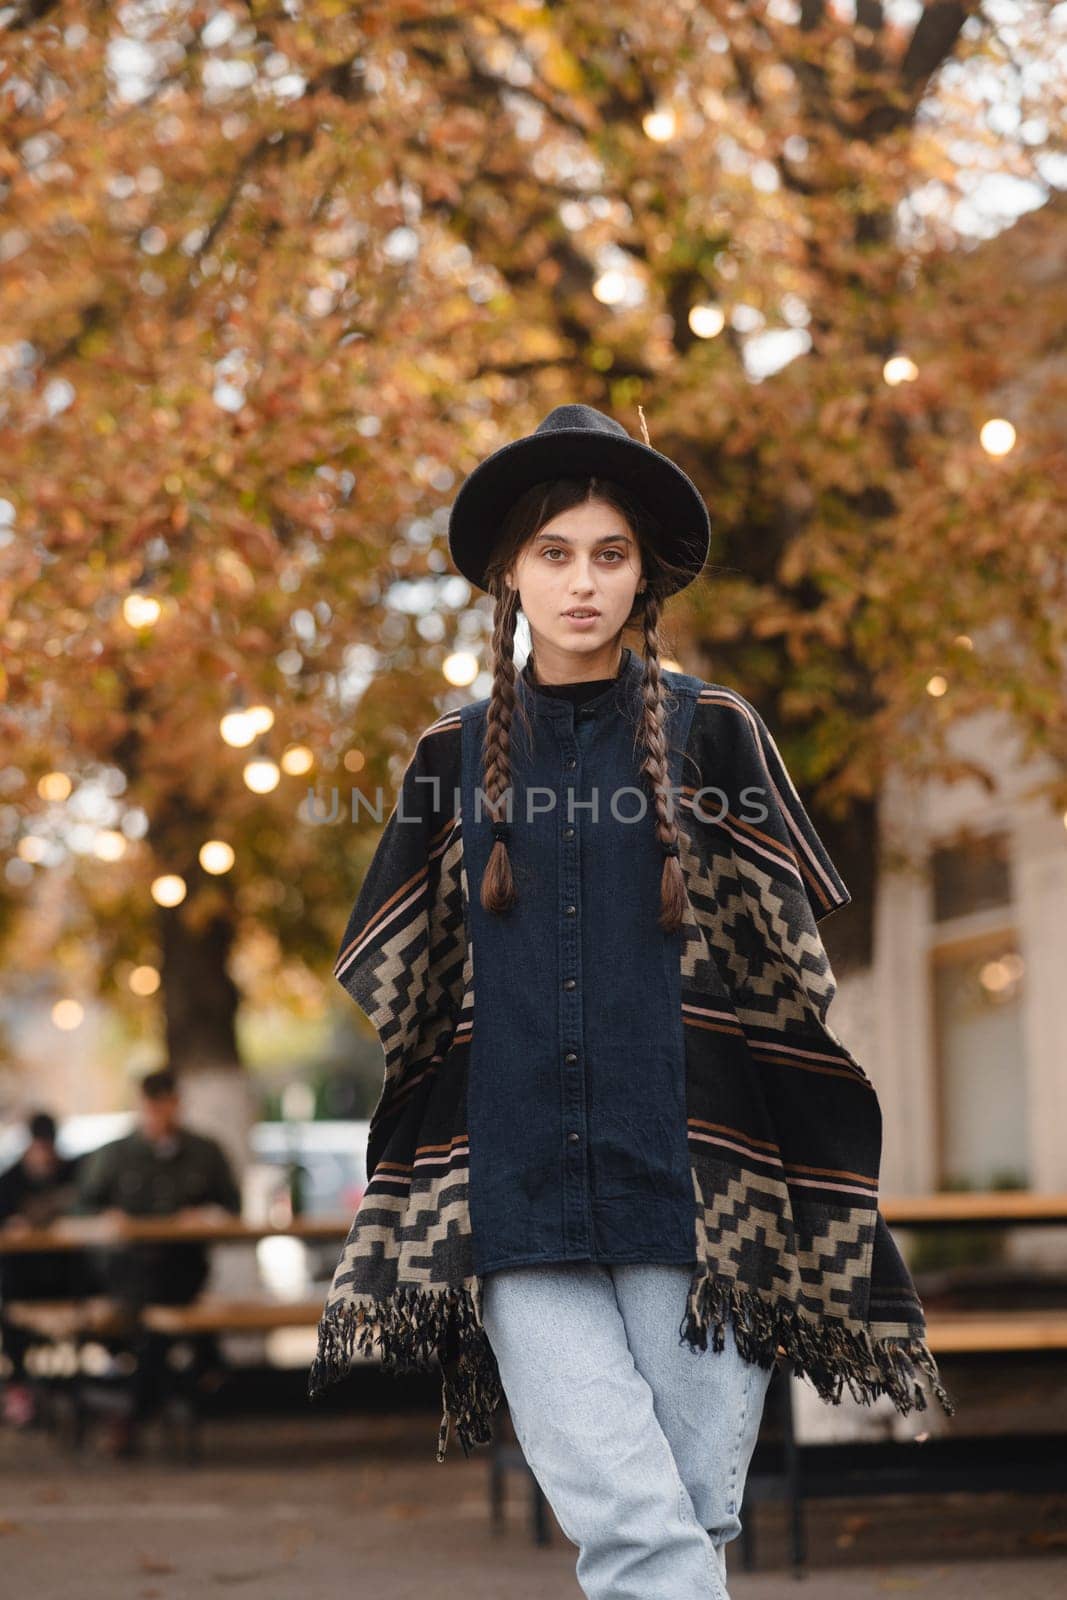 A charming woman, embracing boho fashion, completes her ensemble with a black hat in the autumn city. High quality photo